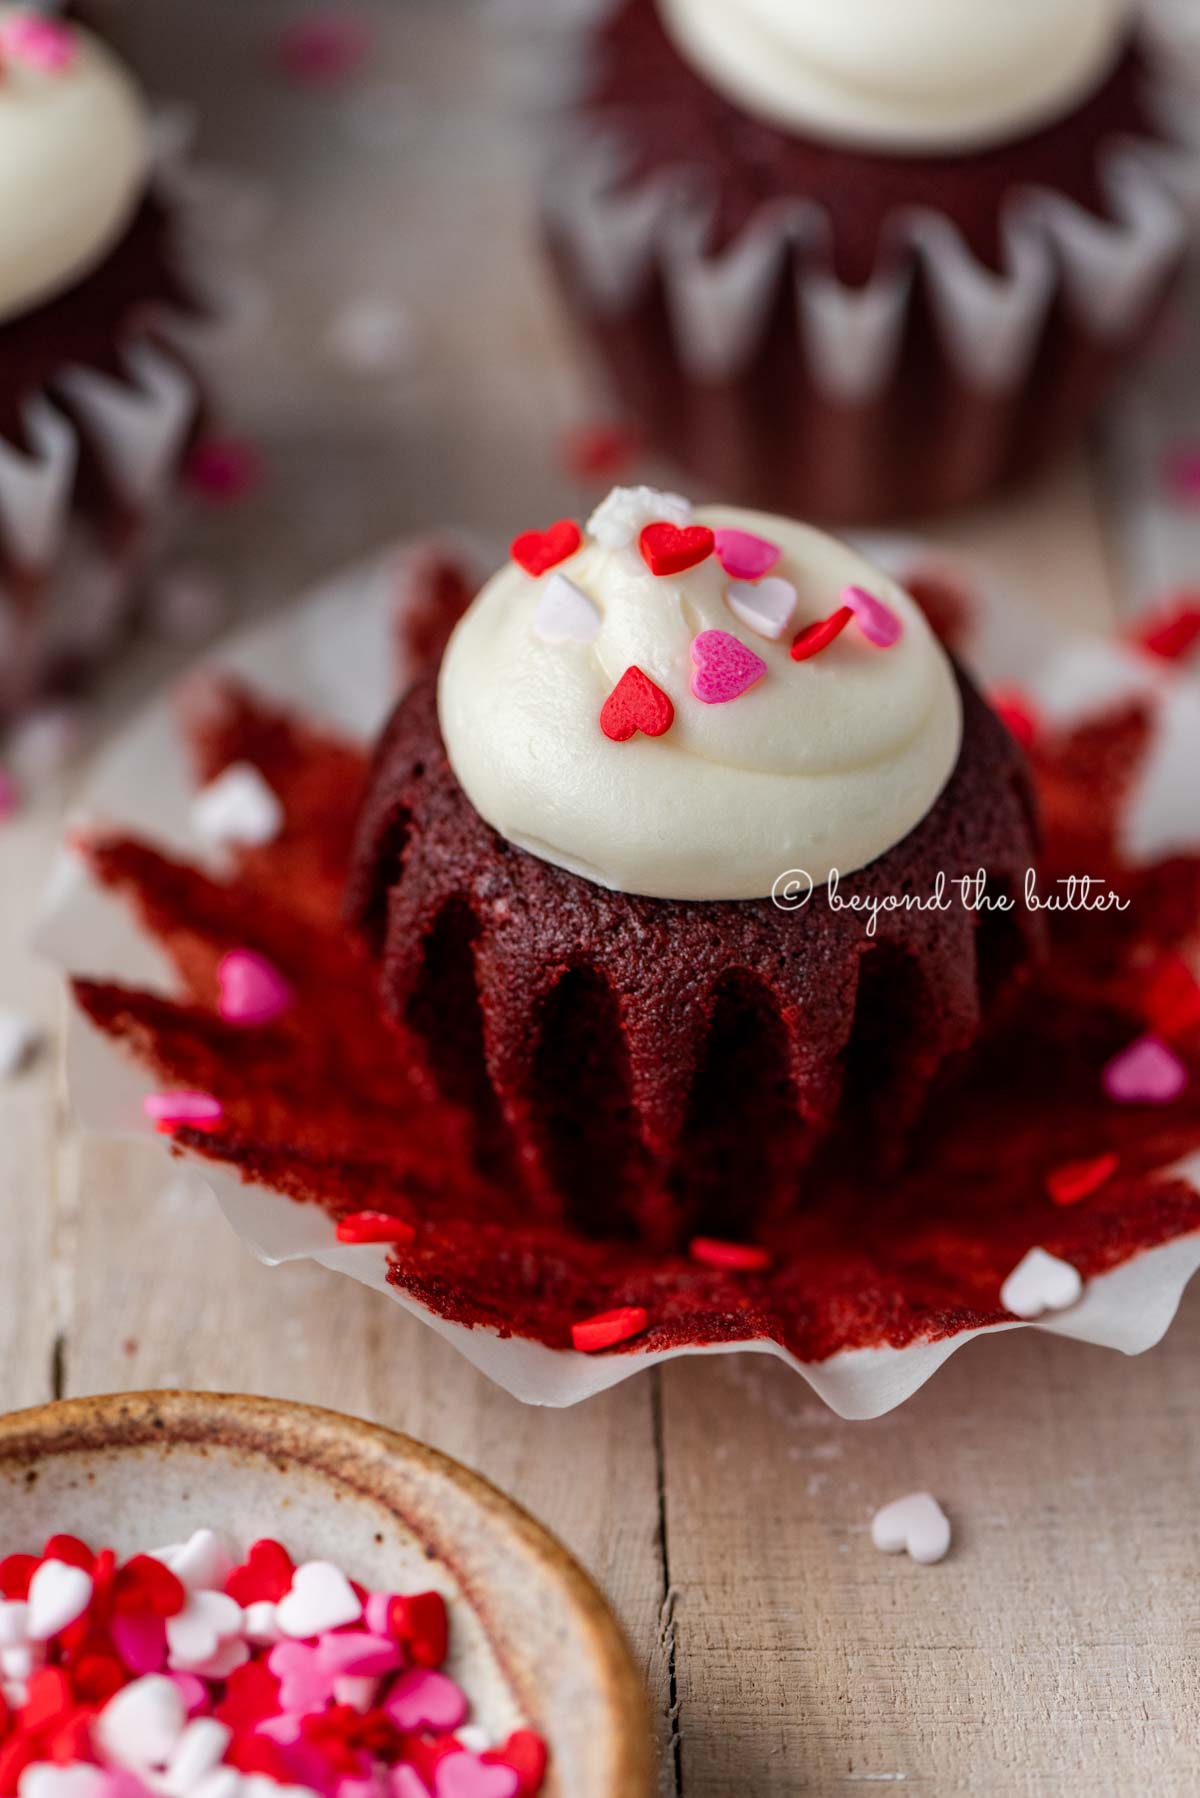 Opened red velvet cupcake with cream cheese frosting topped with heart sprinkles on a light wood background.